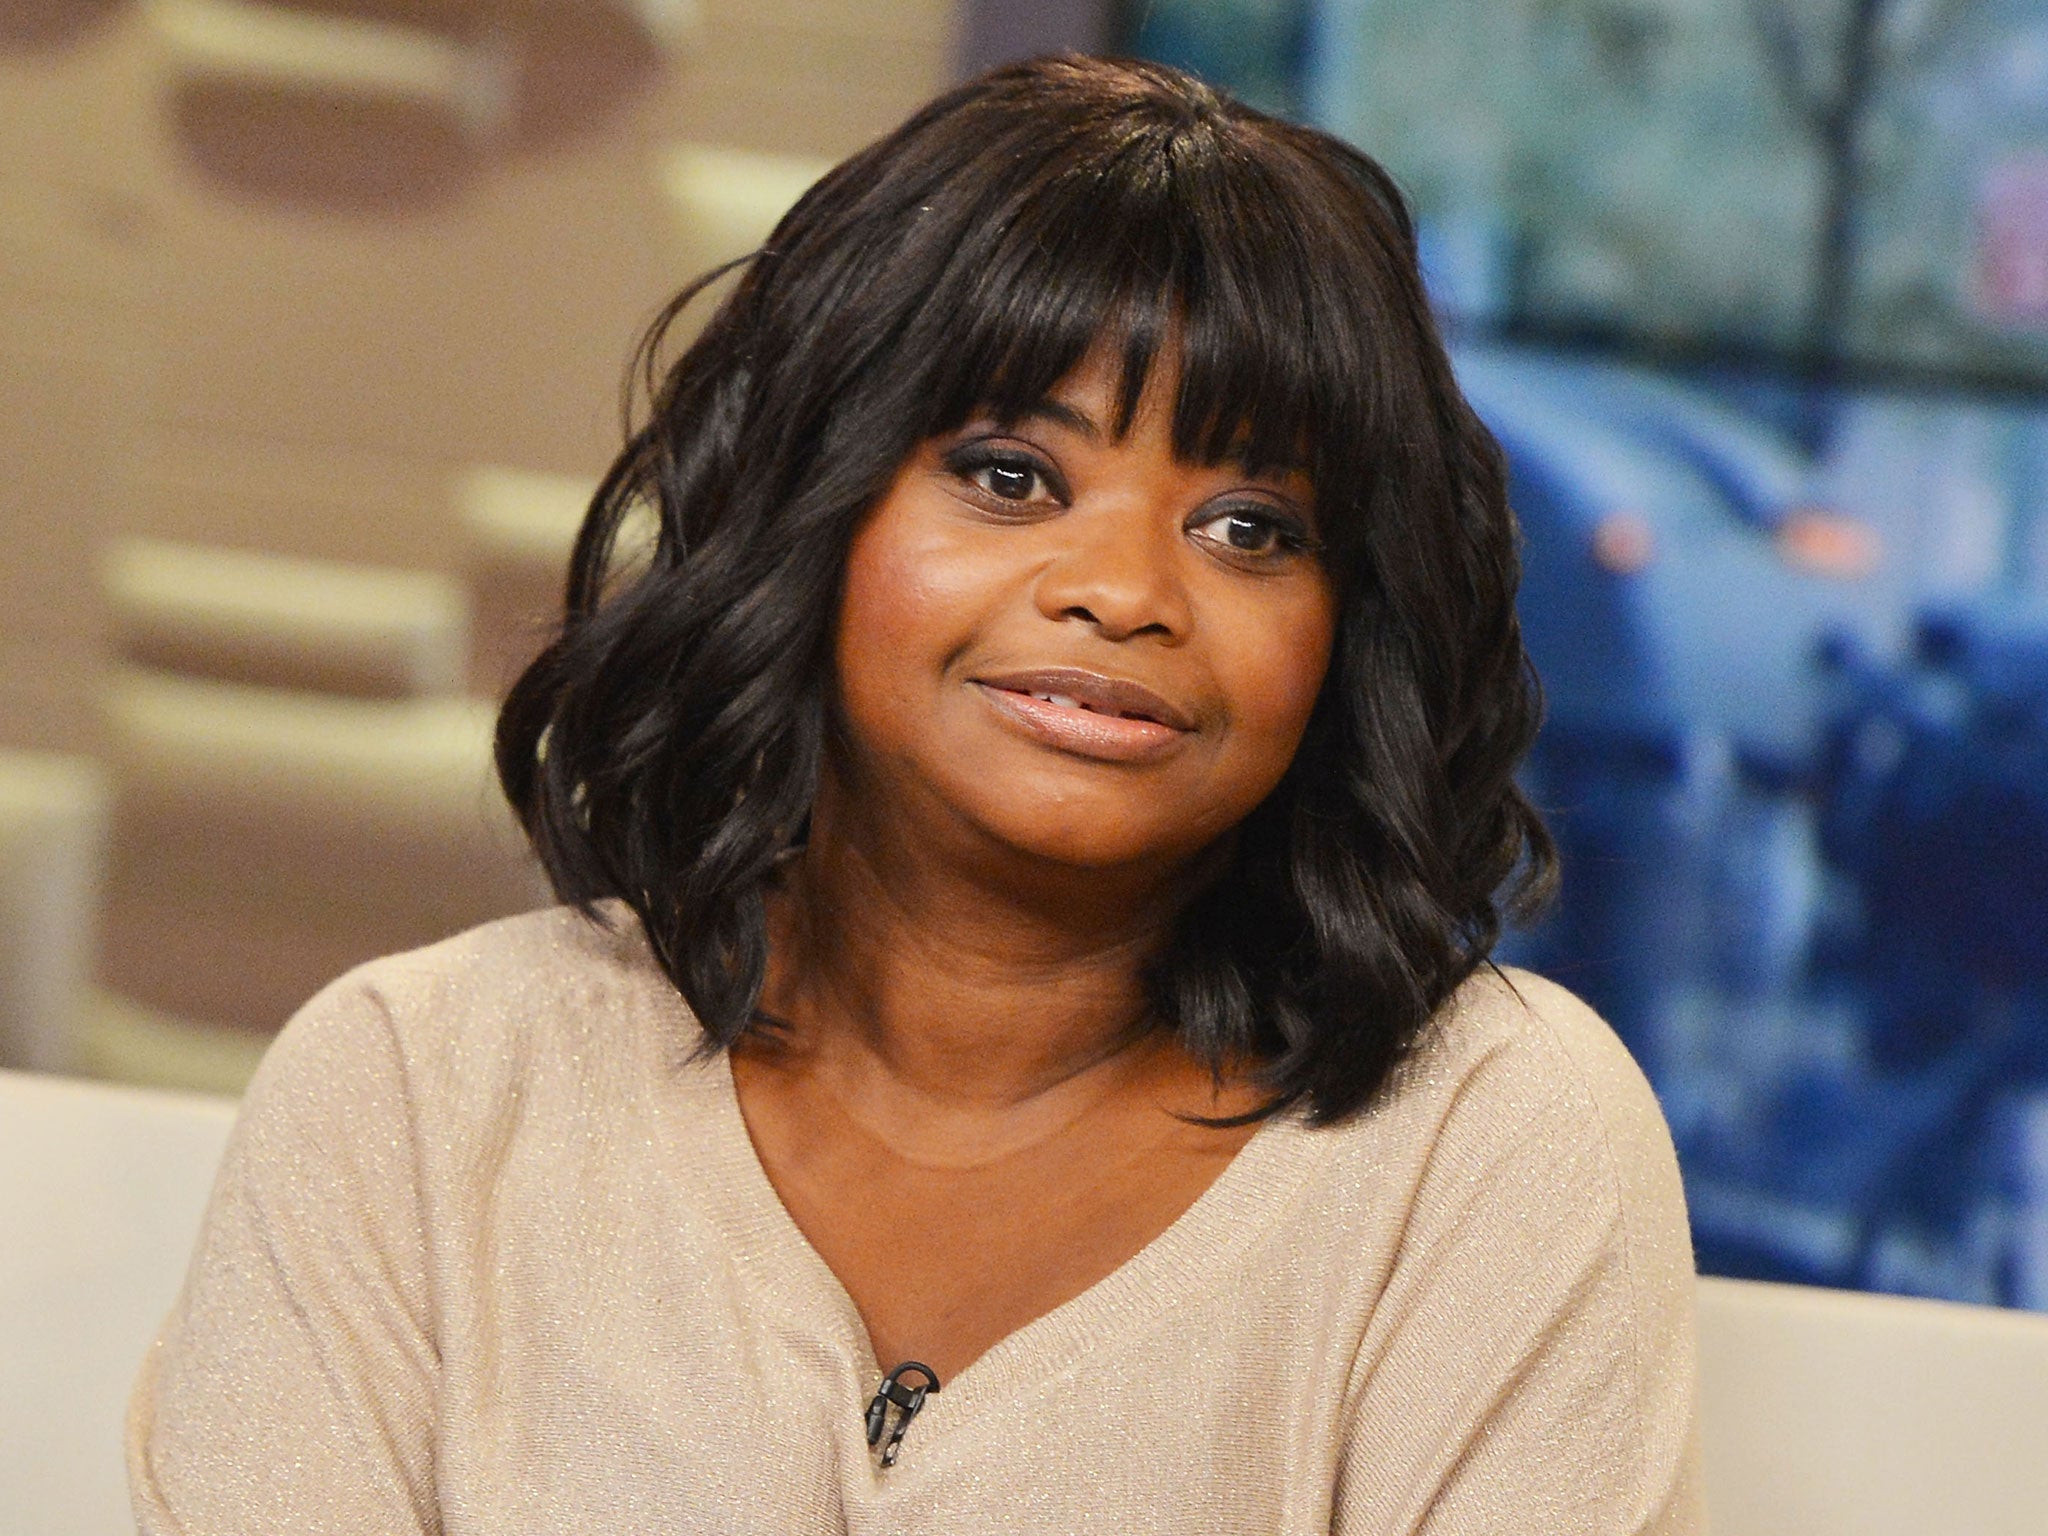 Octavia Spencer is set to star in a reboot of Murder, She Wrote